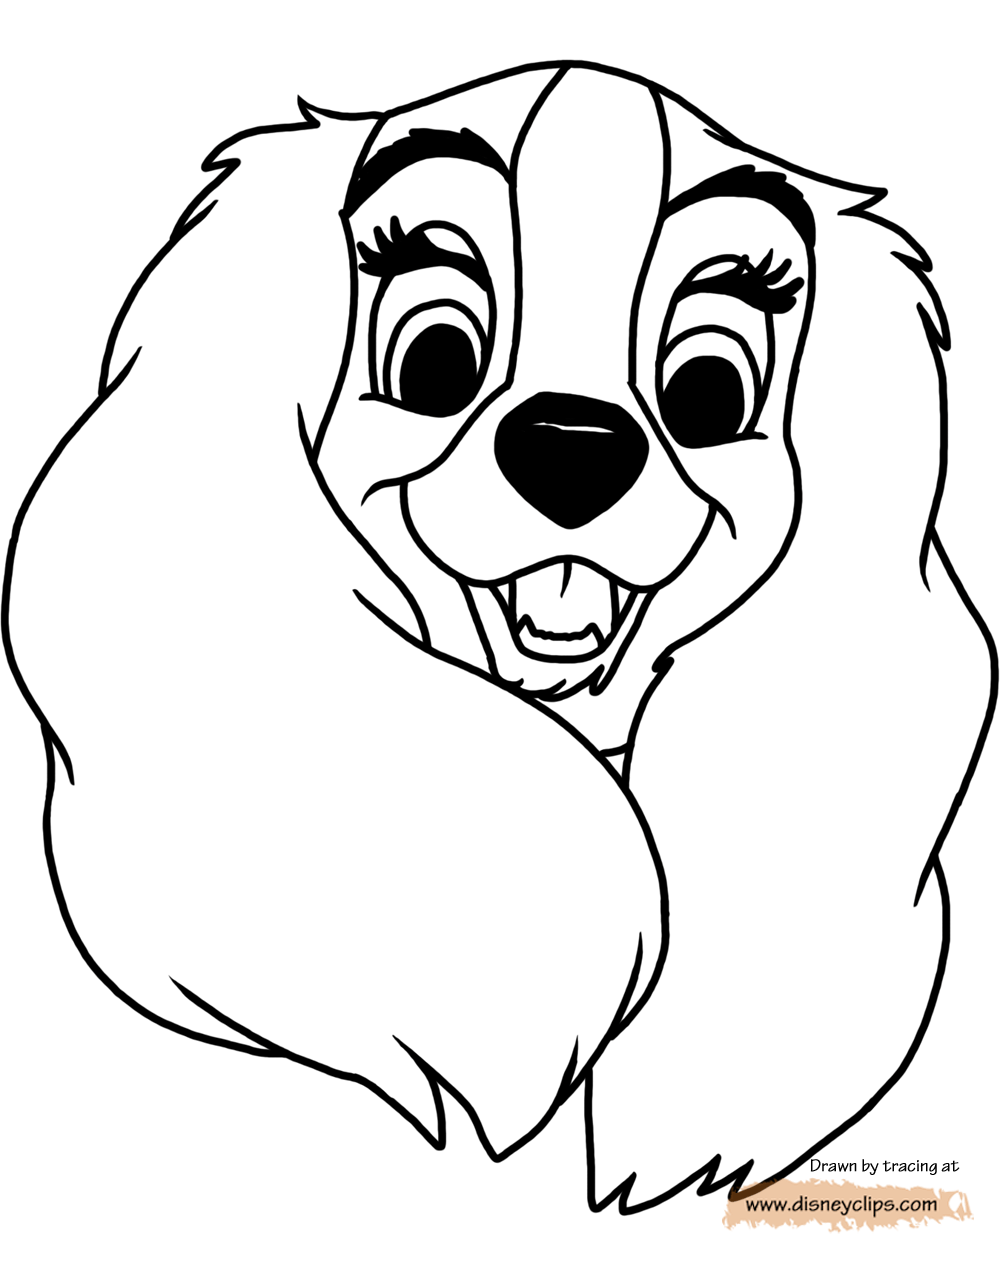 lady the tramp coloring pages - photo #26